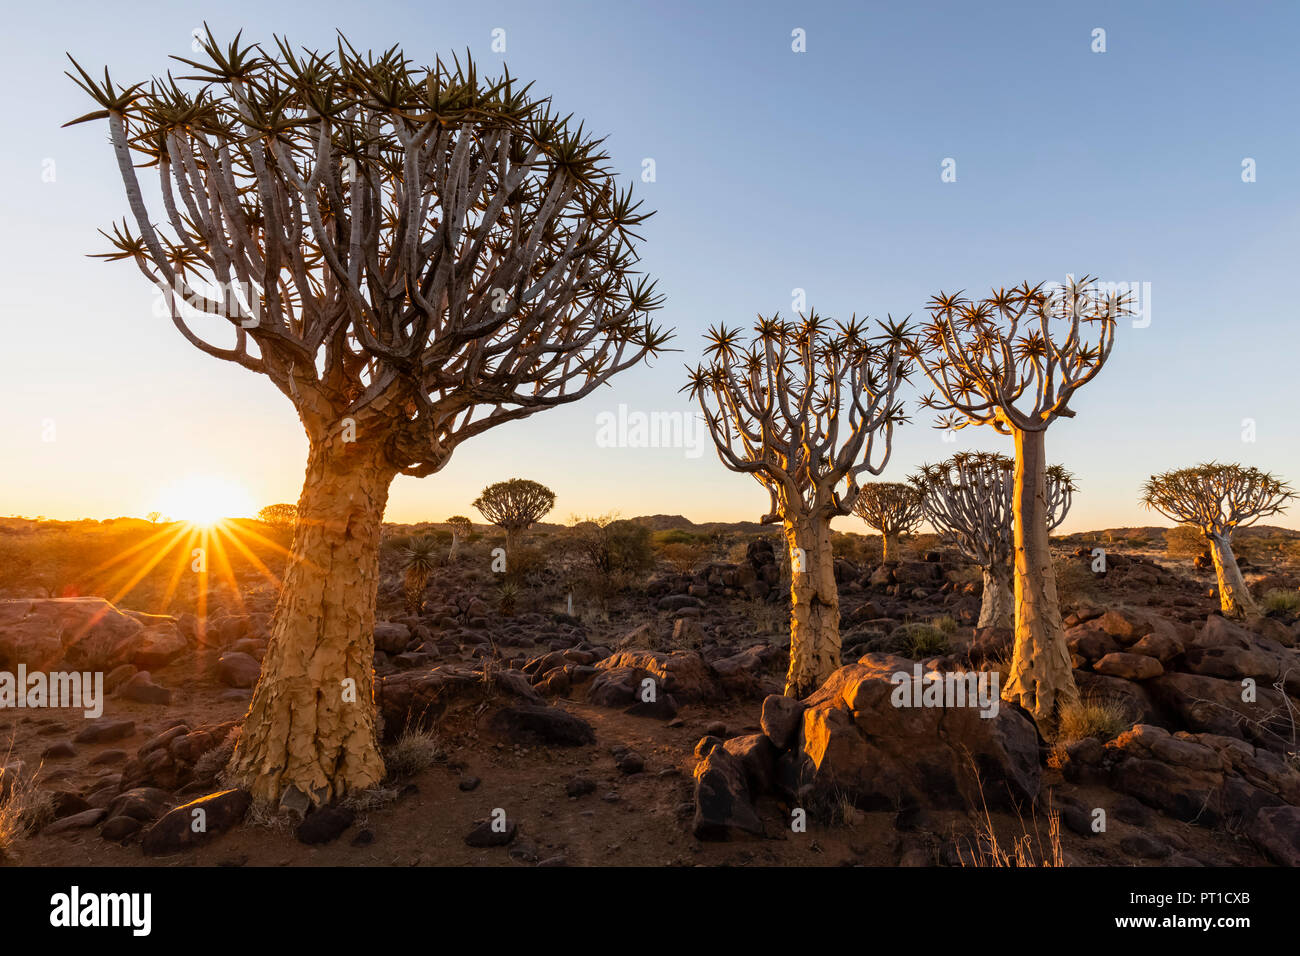 Africa, Namibia, Keetmanshoop, Quiver Tree Forest at sunset Stock Photo